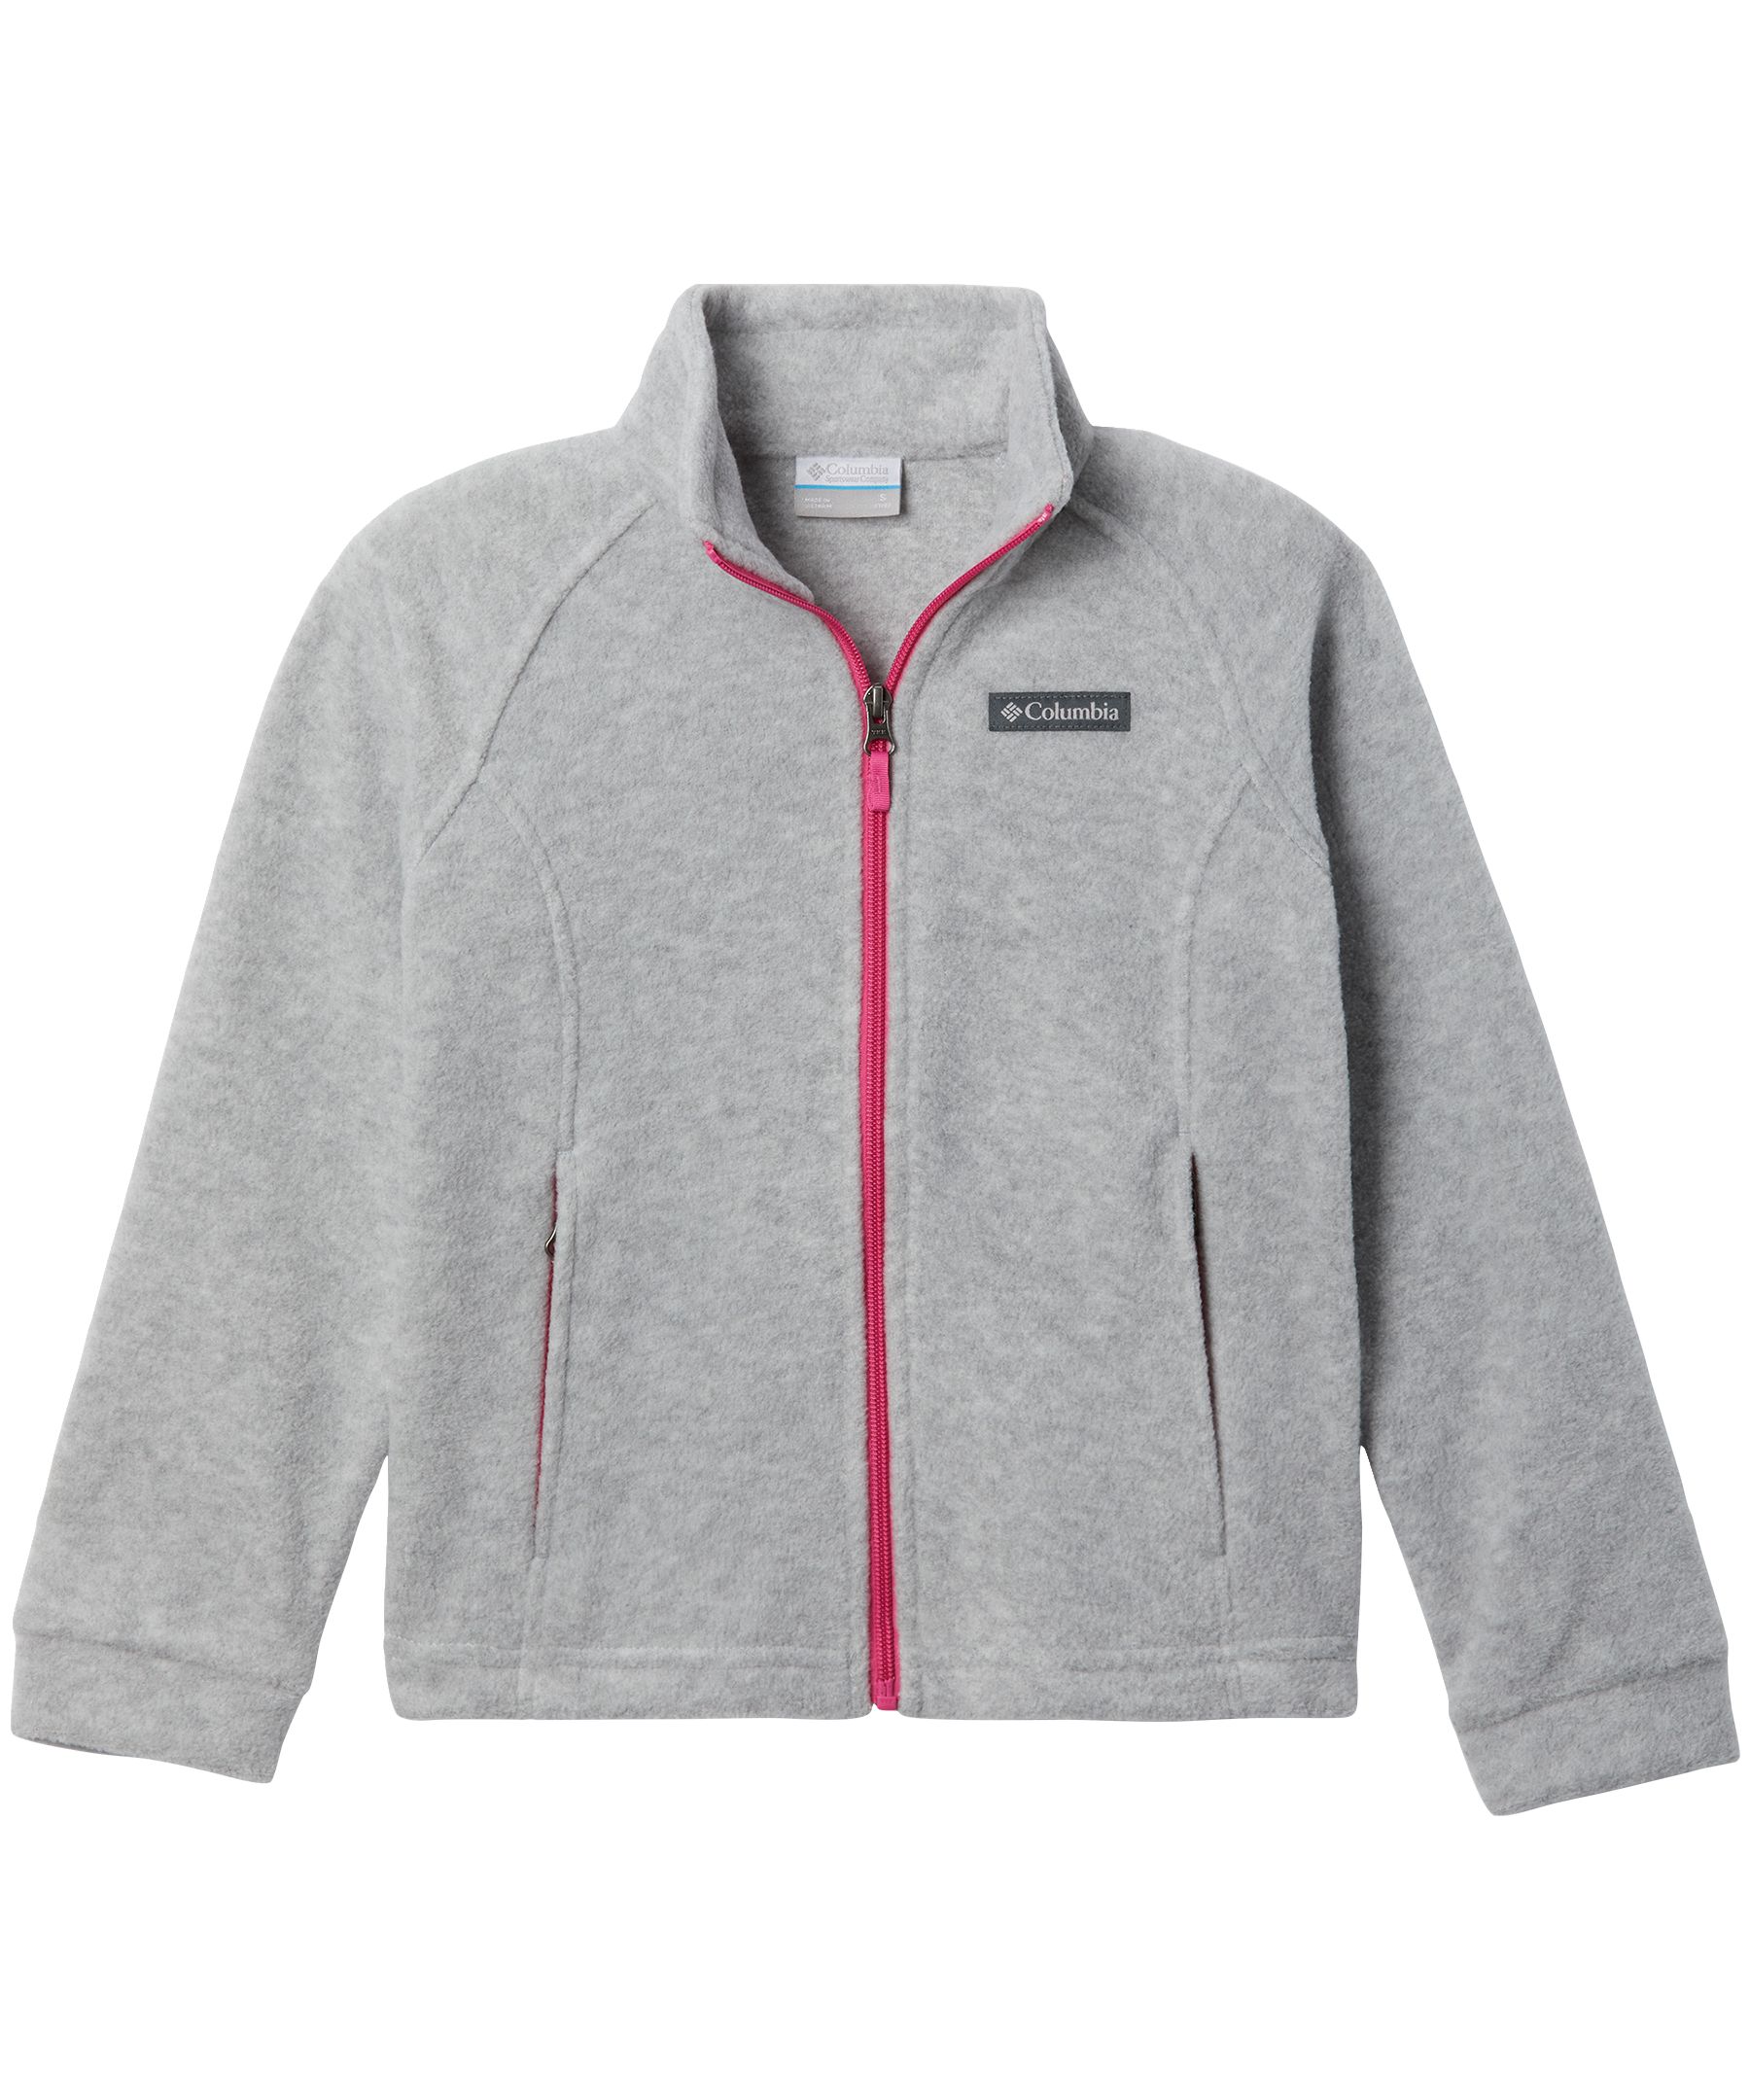 https://media-www.marks.com/product/marks-work-wearhouse/other-world/childrens-wear/410035336911/columbia-girls-7-16-years-benton-springs-ii-spring-and-winter-fleece-jacket-a648f913-dacb-49ab-8b6d-5c2d21b0b2b2-jpgrendition.jpg?imdensity=1&imwidth=1244&impolicy=mZoom